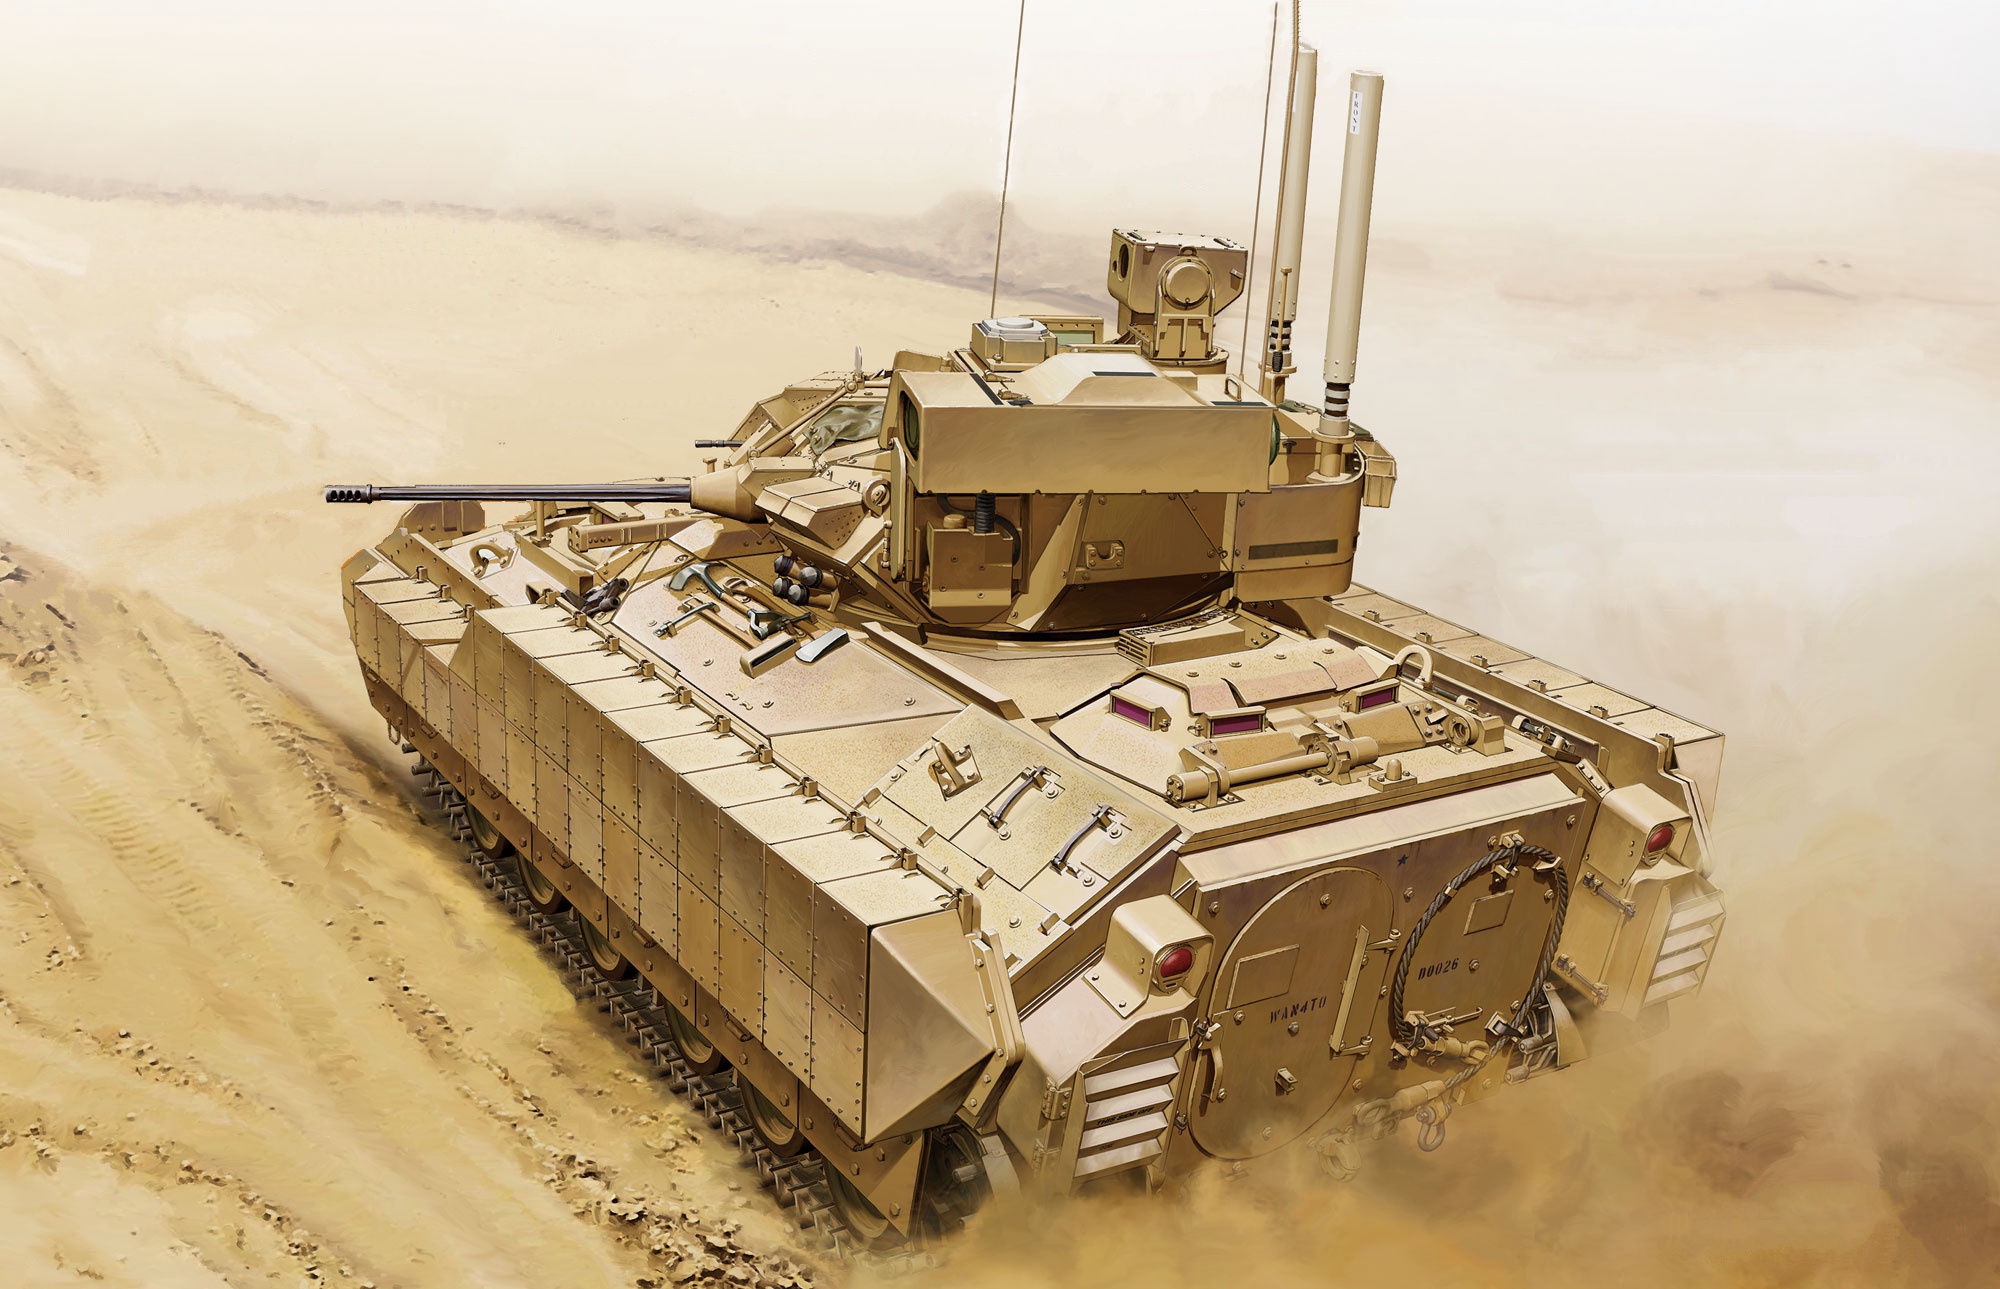 Artistic Bmp 3 Infantry Fighting Vehicle Vehicle 2000x1289